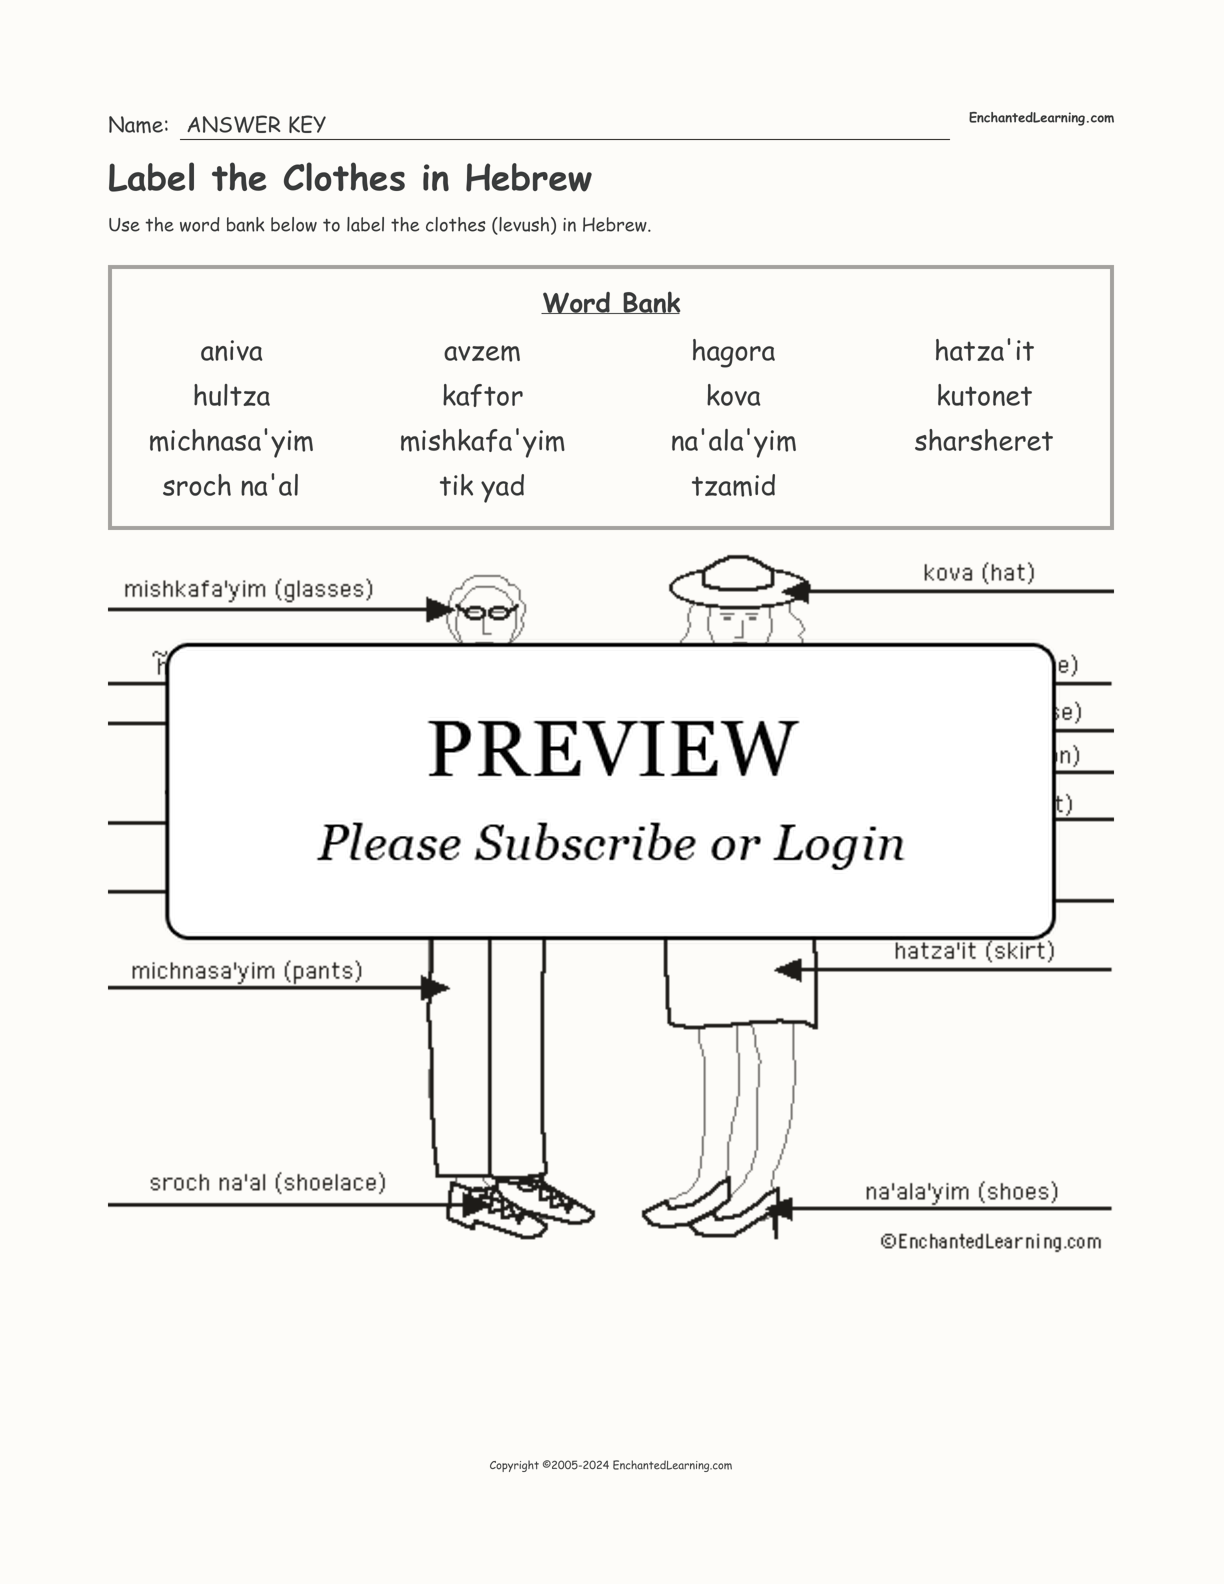 Label the Clothes in Hebrew interactive worksheet page 2